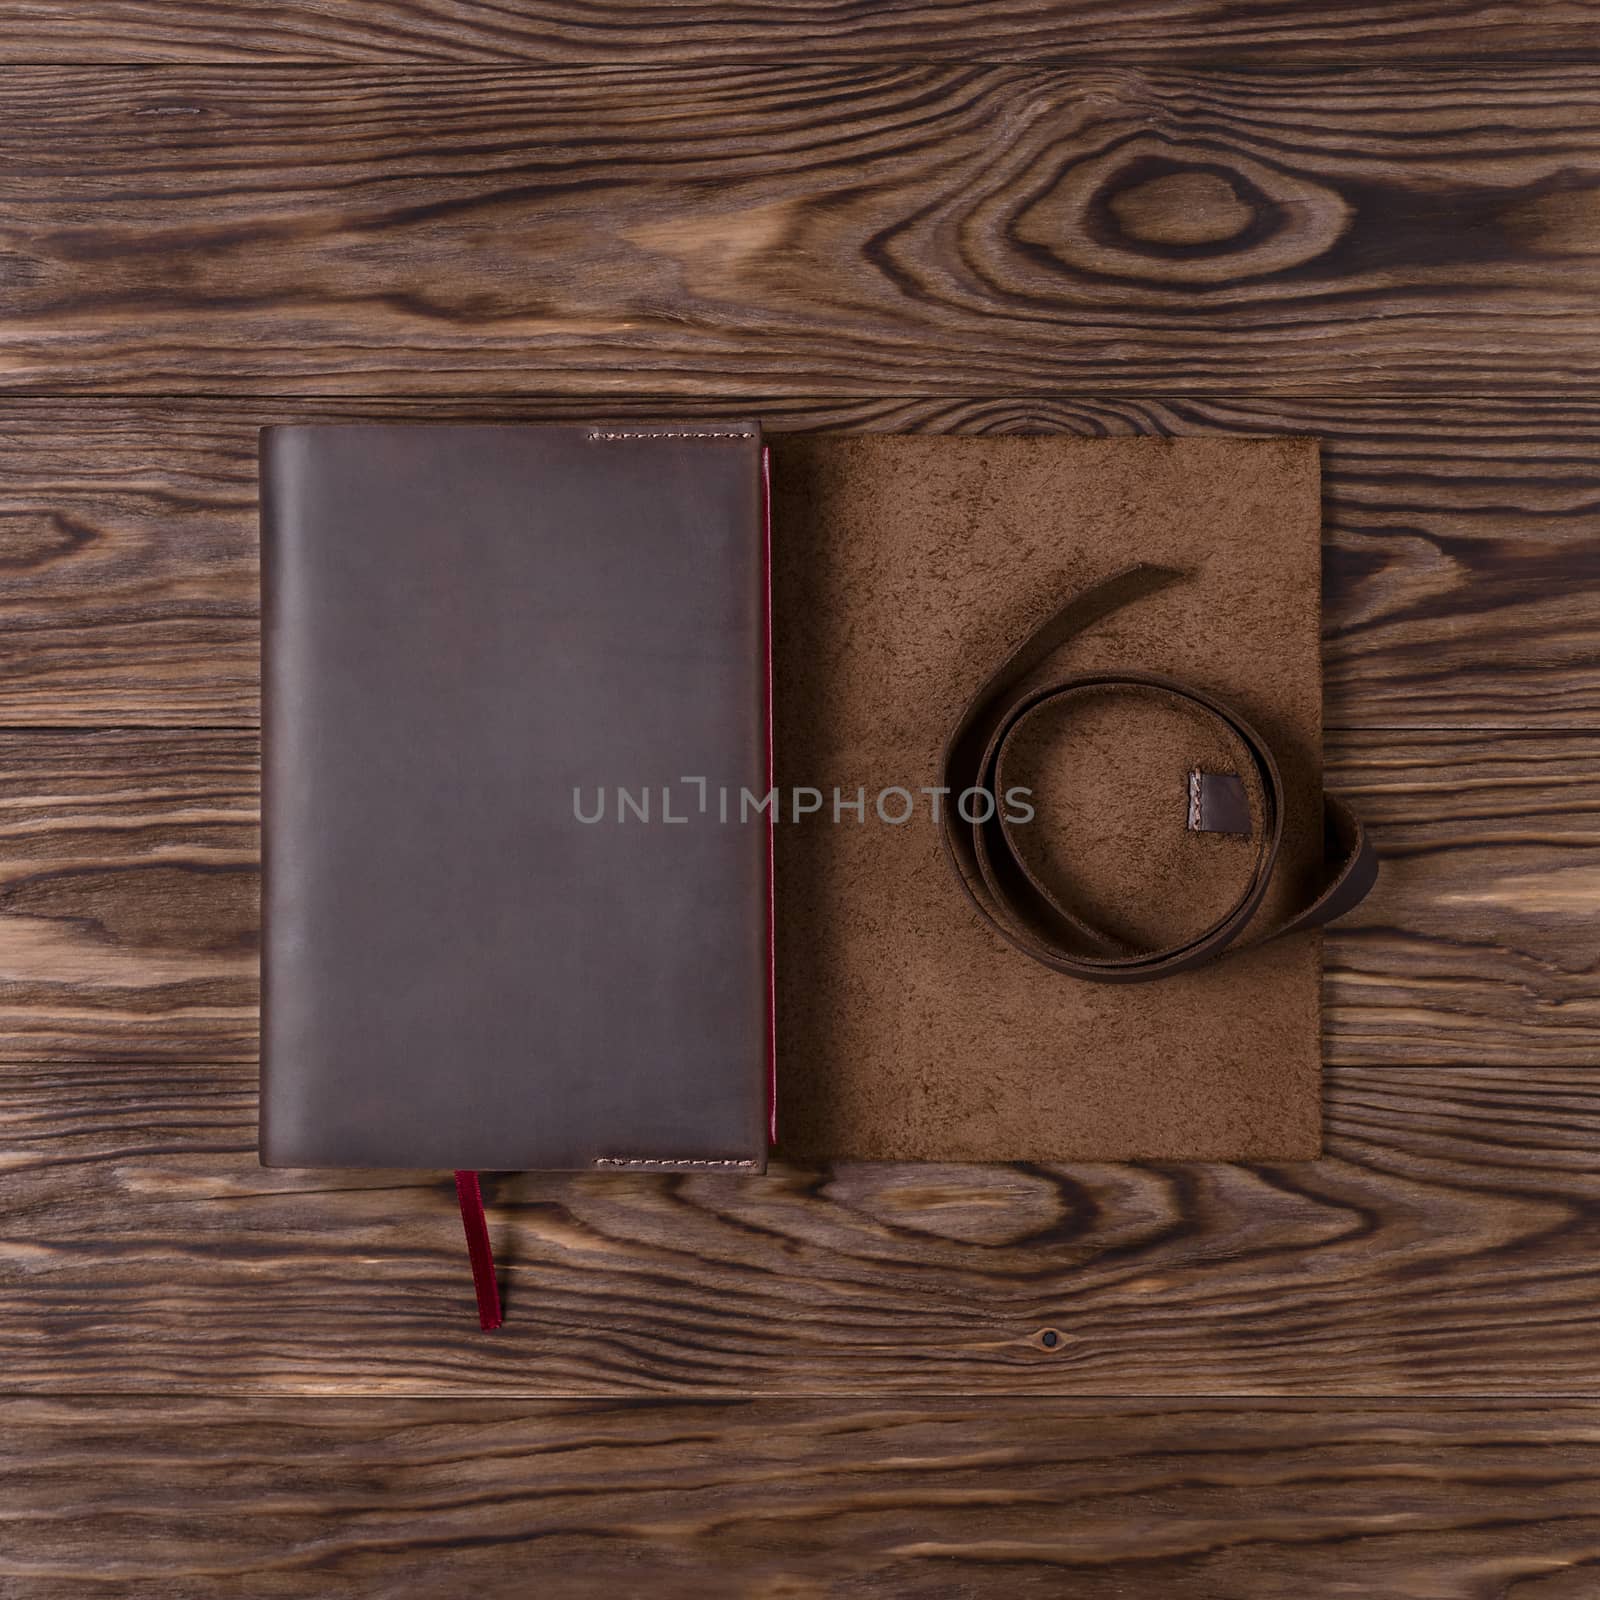 Brown handmade leather notebook cover with notebook on wooden background. Stock photo of luxury business accessories. Up to down view.